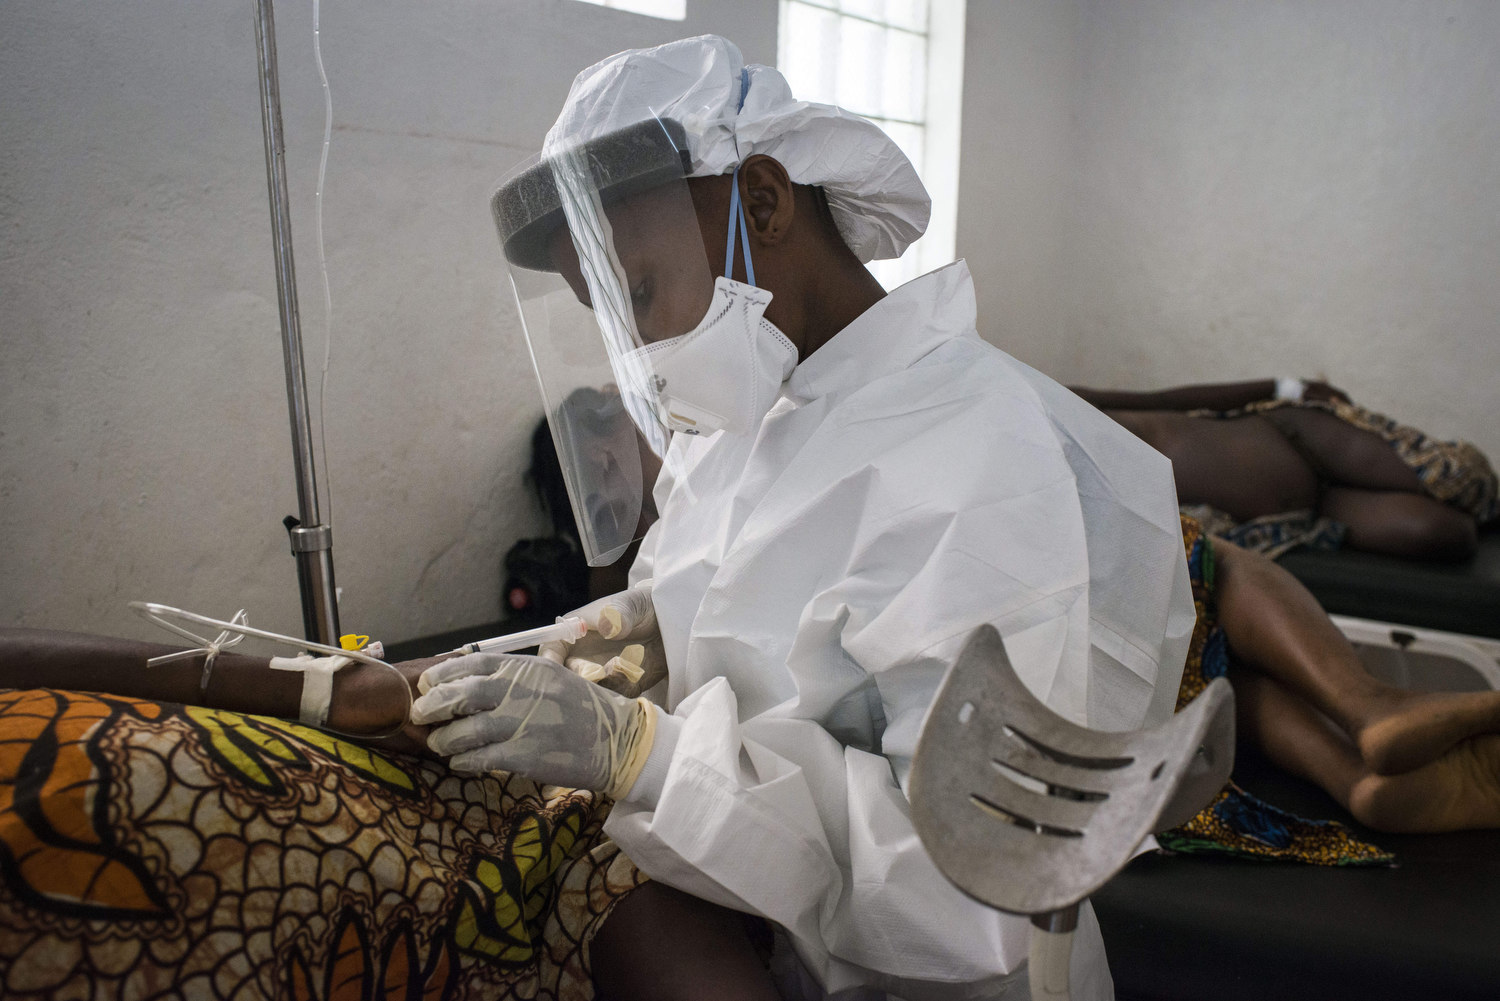  A nurse takes blood from Kema James after she delivers. Full body protection is used to collect blood samples as Ebola is still a precaution in Sierra Leone.  